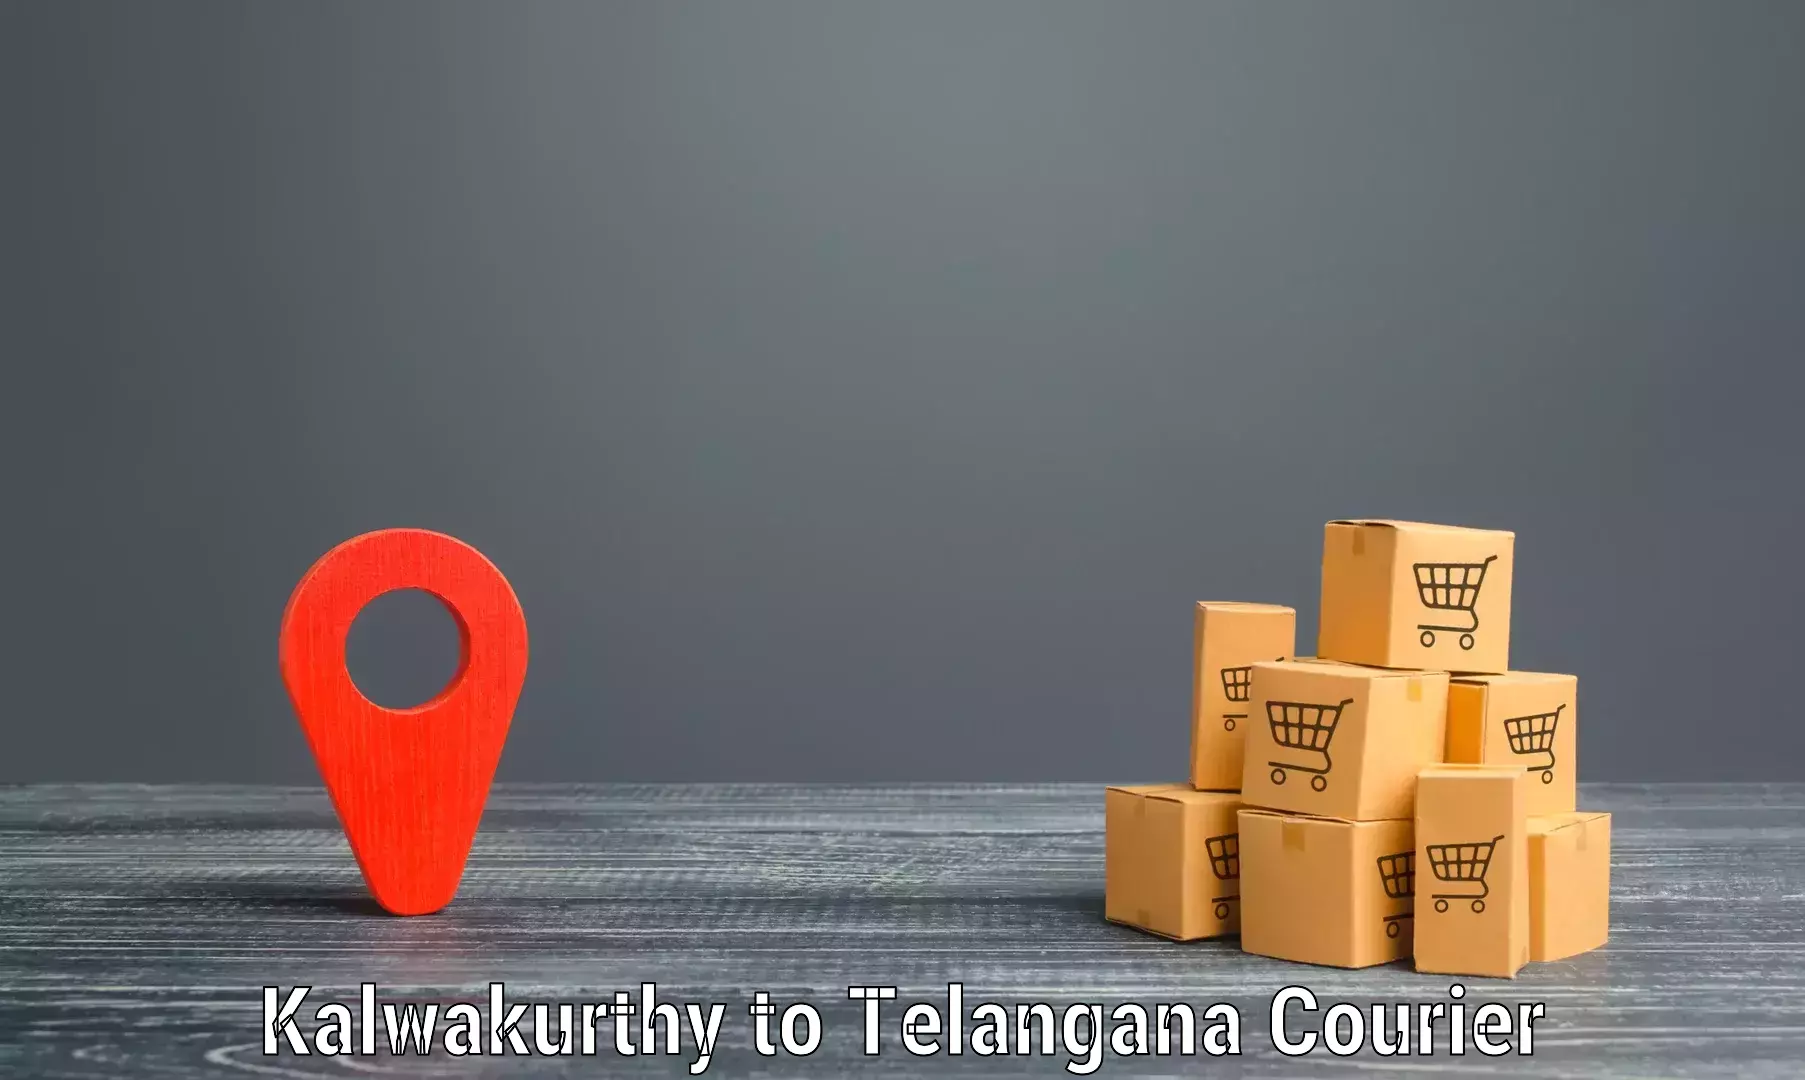 Small parcel delivery in Kalwakurthy to Khairatabad